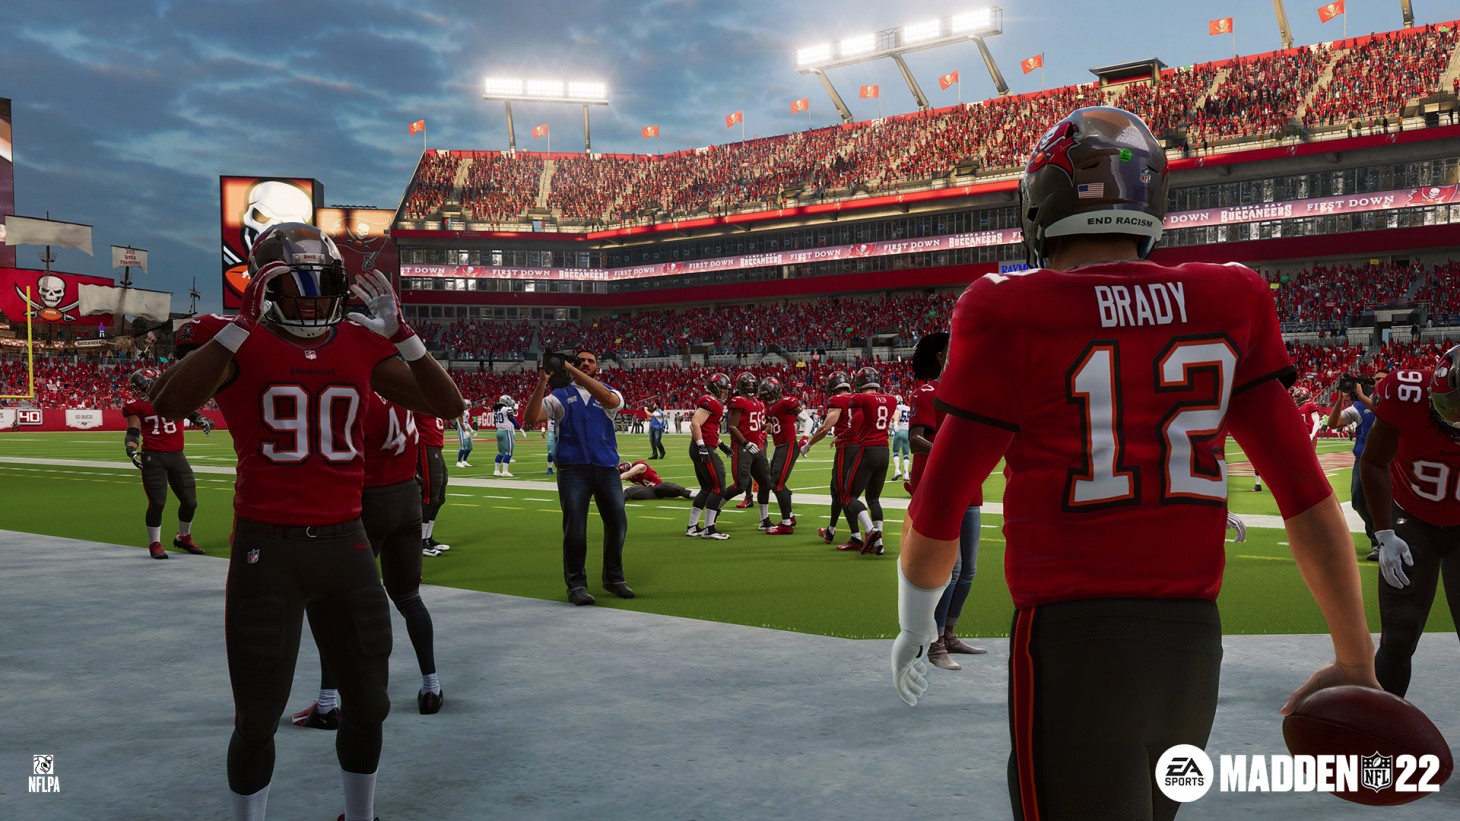 NFL Pro Bowl 2021 will be virtual, players to compete in Madden